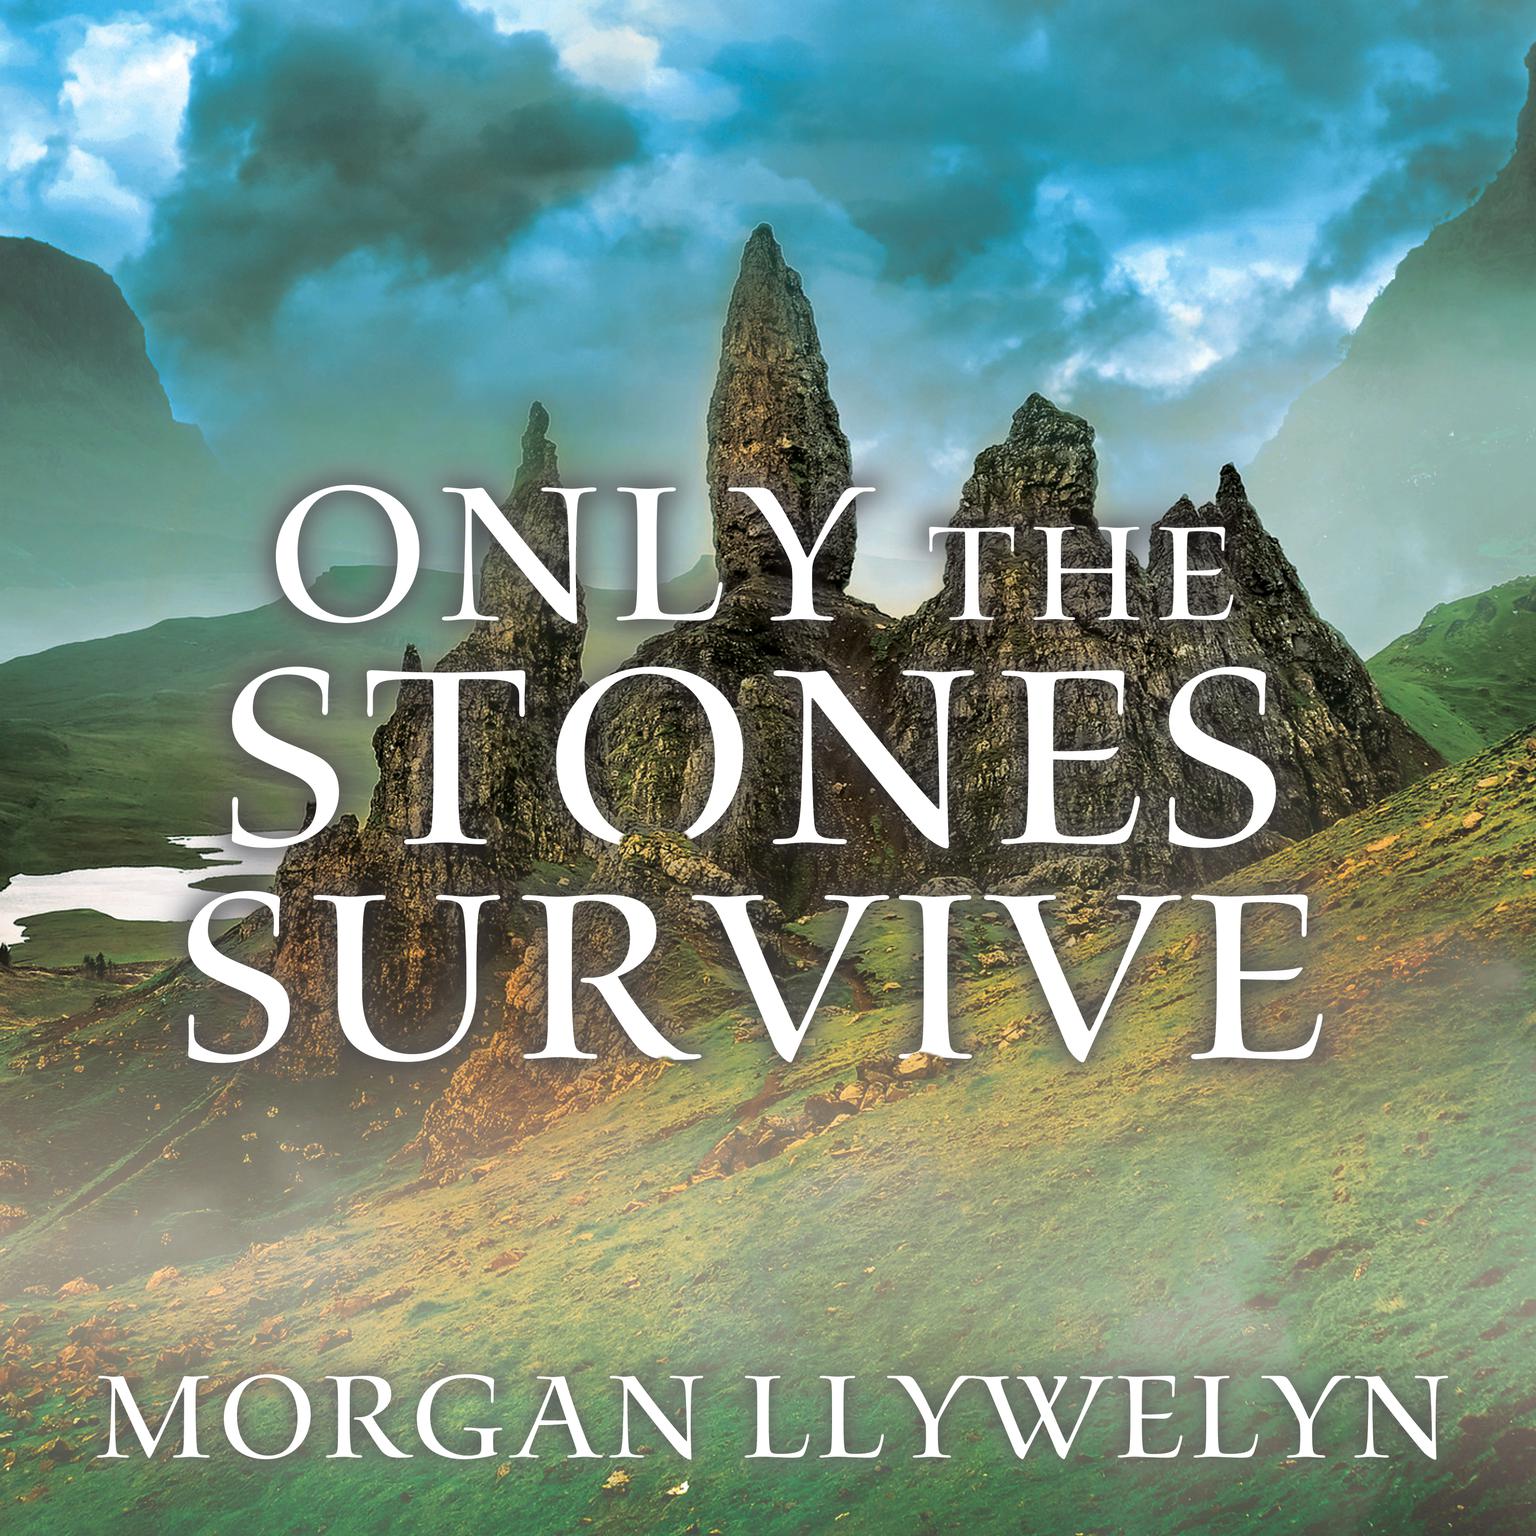 Only the Stones Survive Audiobook, by Morgan Llywelyn